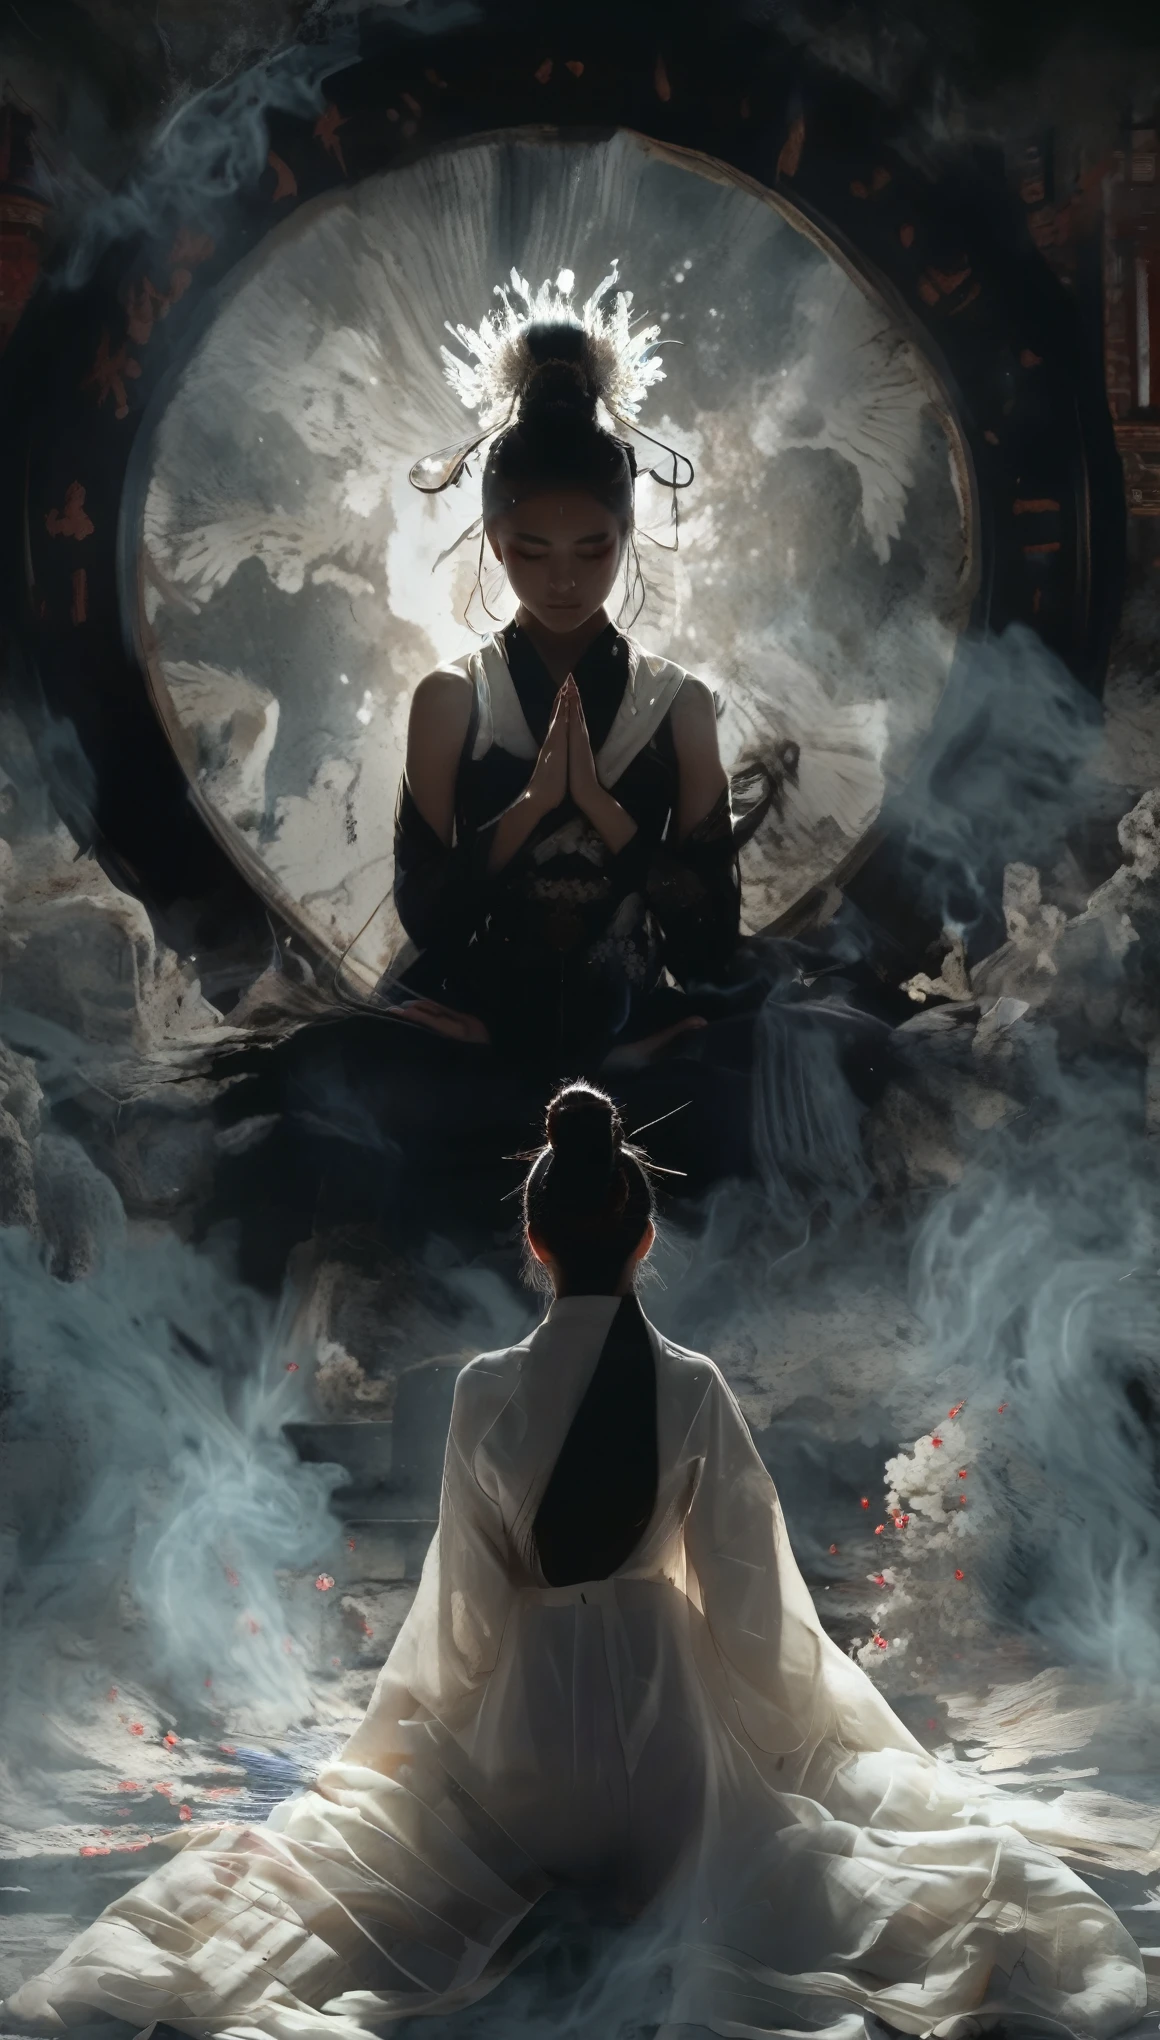 a bird's eye view capturing a stunningly beautiful Japanese shrine maiden clad in a white top and black bottom, striking a prayer pose while exuding an aura of serenity. However, looming ominously behind her, a vengeful spirit of a samurai manifests in a dark, eerie black aura, adding a chilling contrast to the otherwise tranquil scene. The juxtaposition of the maiden's grace and the samurai's haunting presence creates a captivating image that blends beauty with a touch of supernatural intrigue, inviting viewers to contemplate the duality of peace and vengeance.xianxia